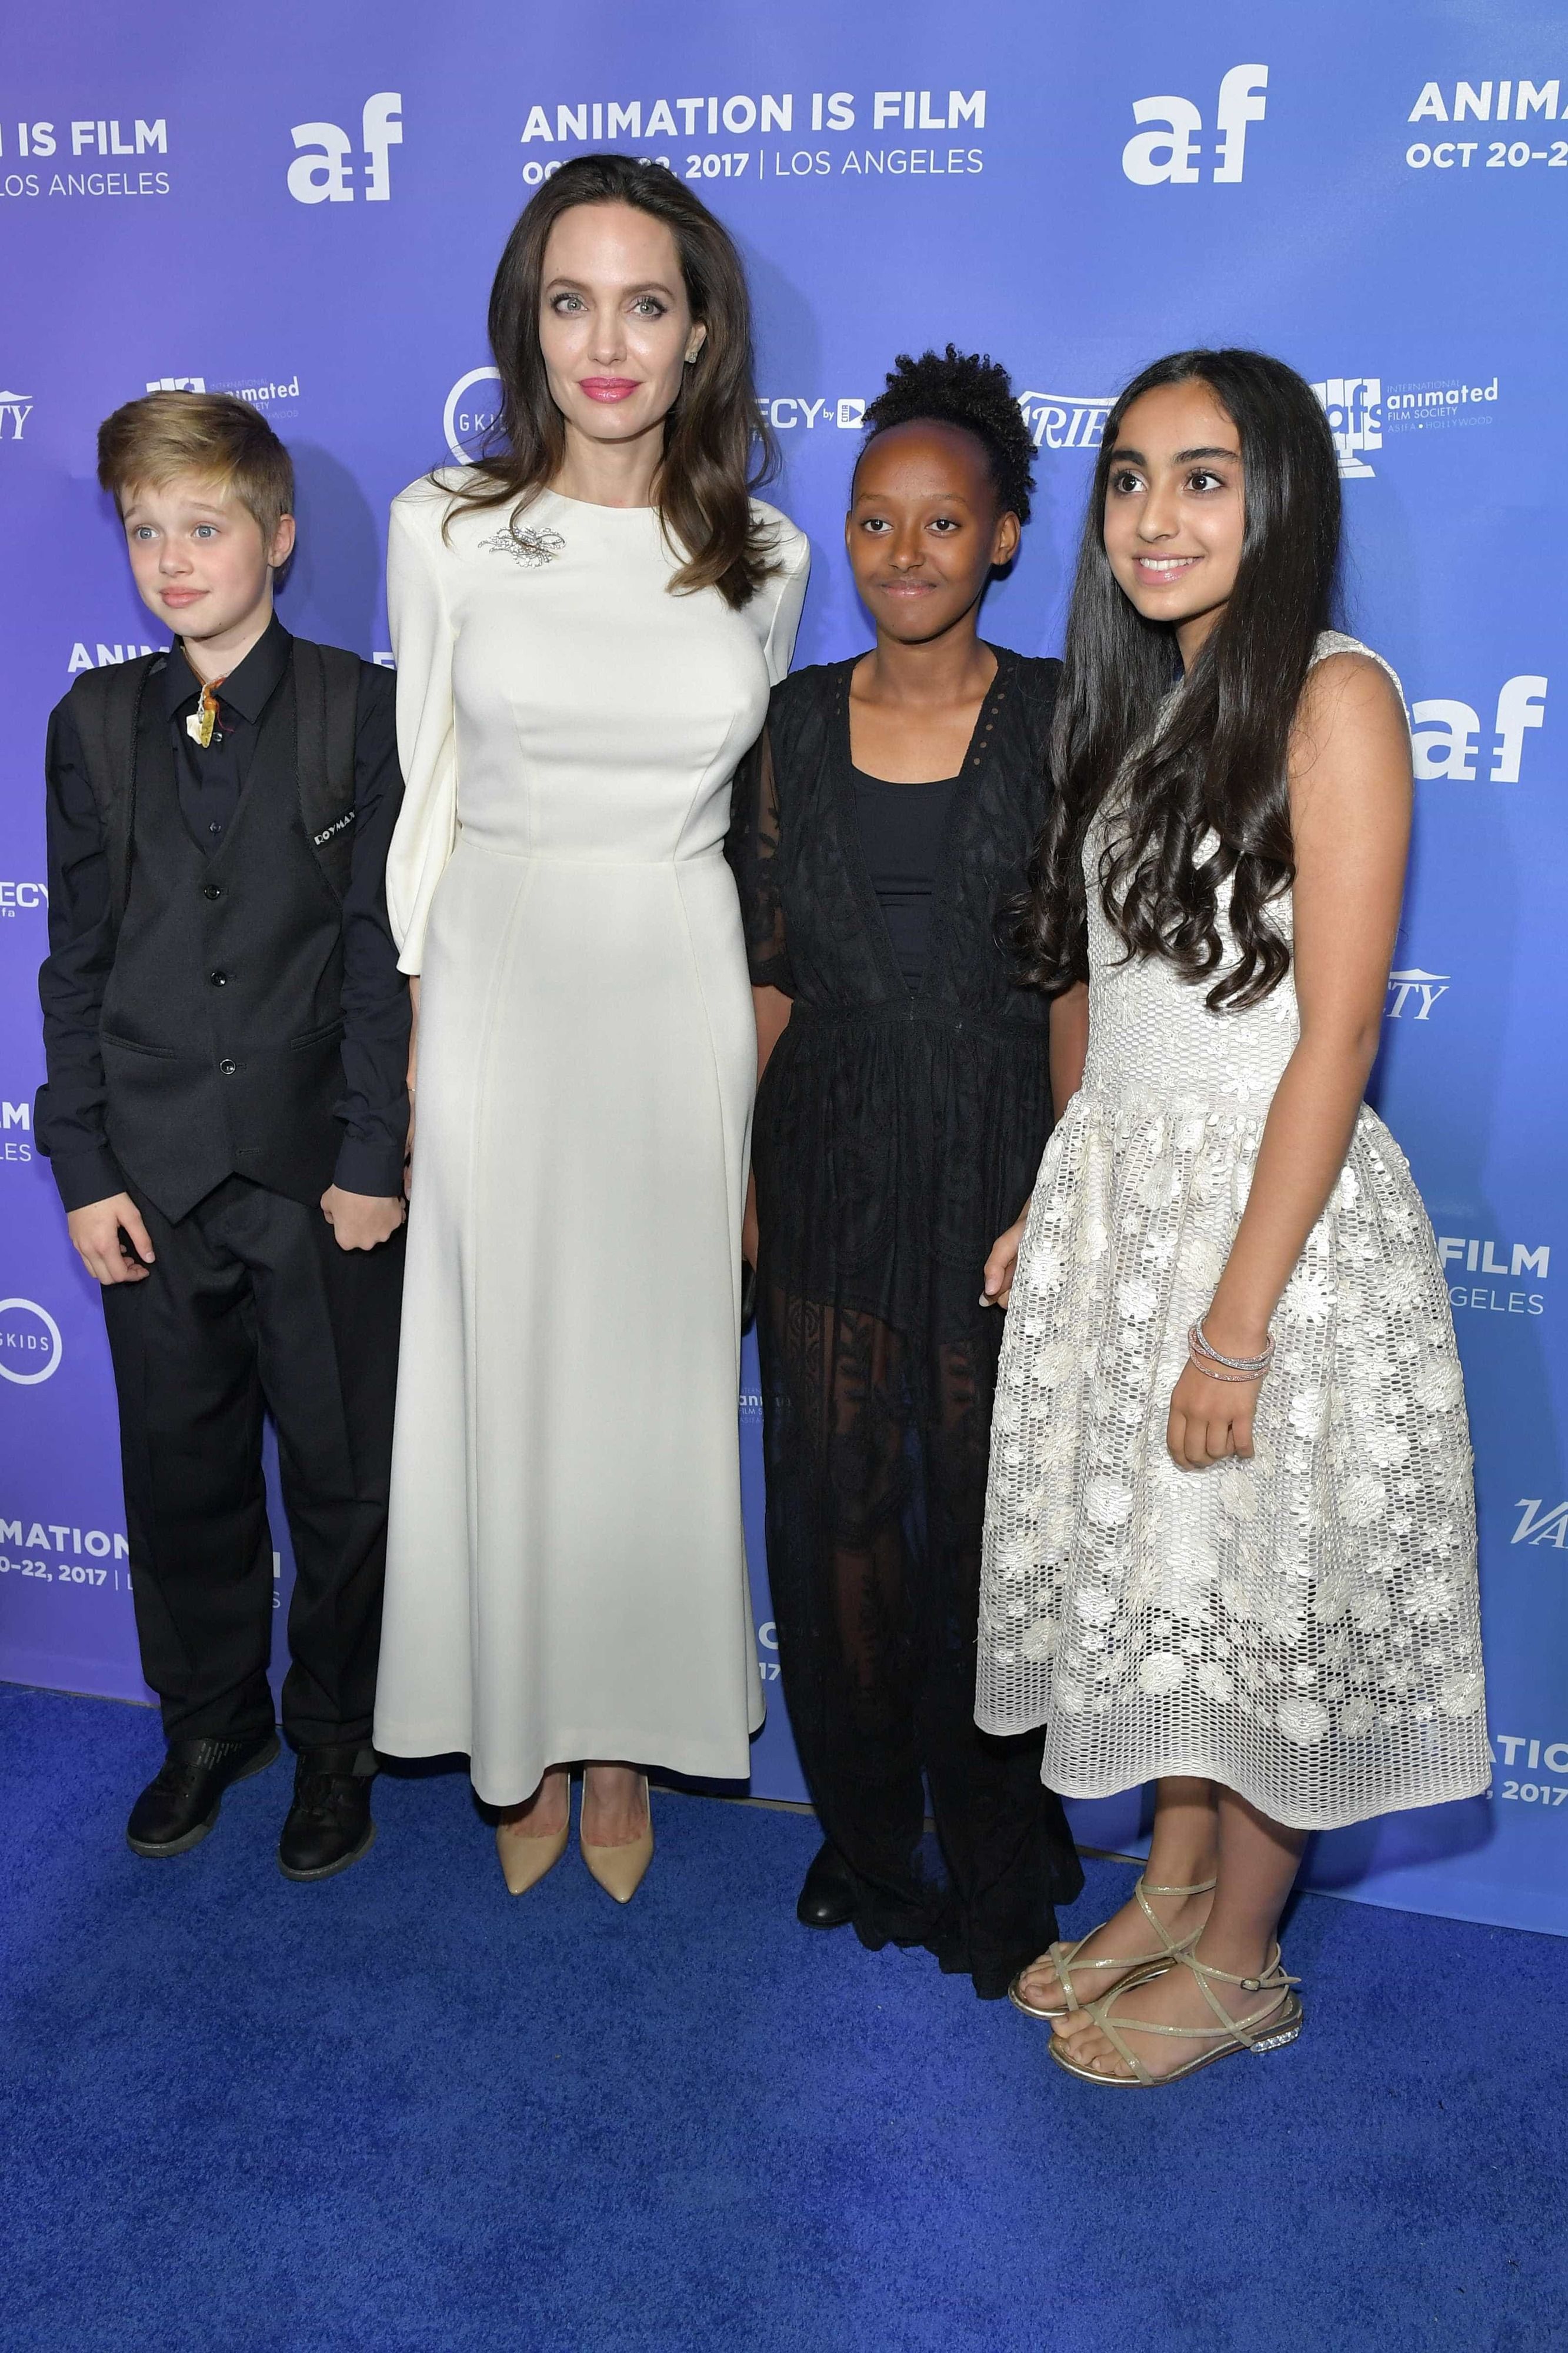  Shiloh Jolie-Pitt, Angelina Jolie, Zahara Jolie-Pitt and Saara Chaudry attend the premiere of Gkids' 'The Breadwinner' at TCL Chinese 6 Theatres on October 20, 2017 in Hollywood, California. | Photo: Getty Images 